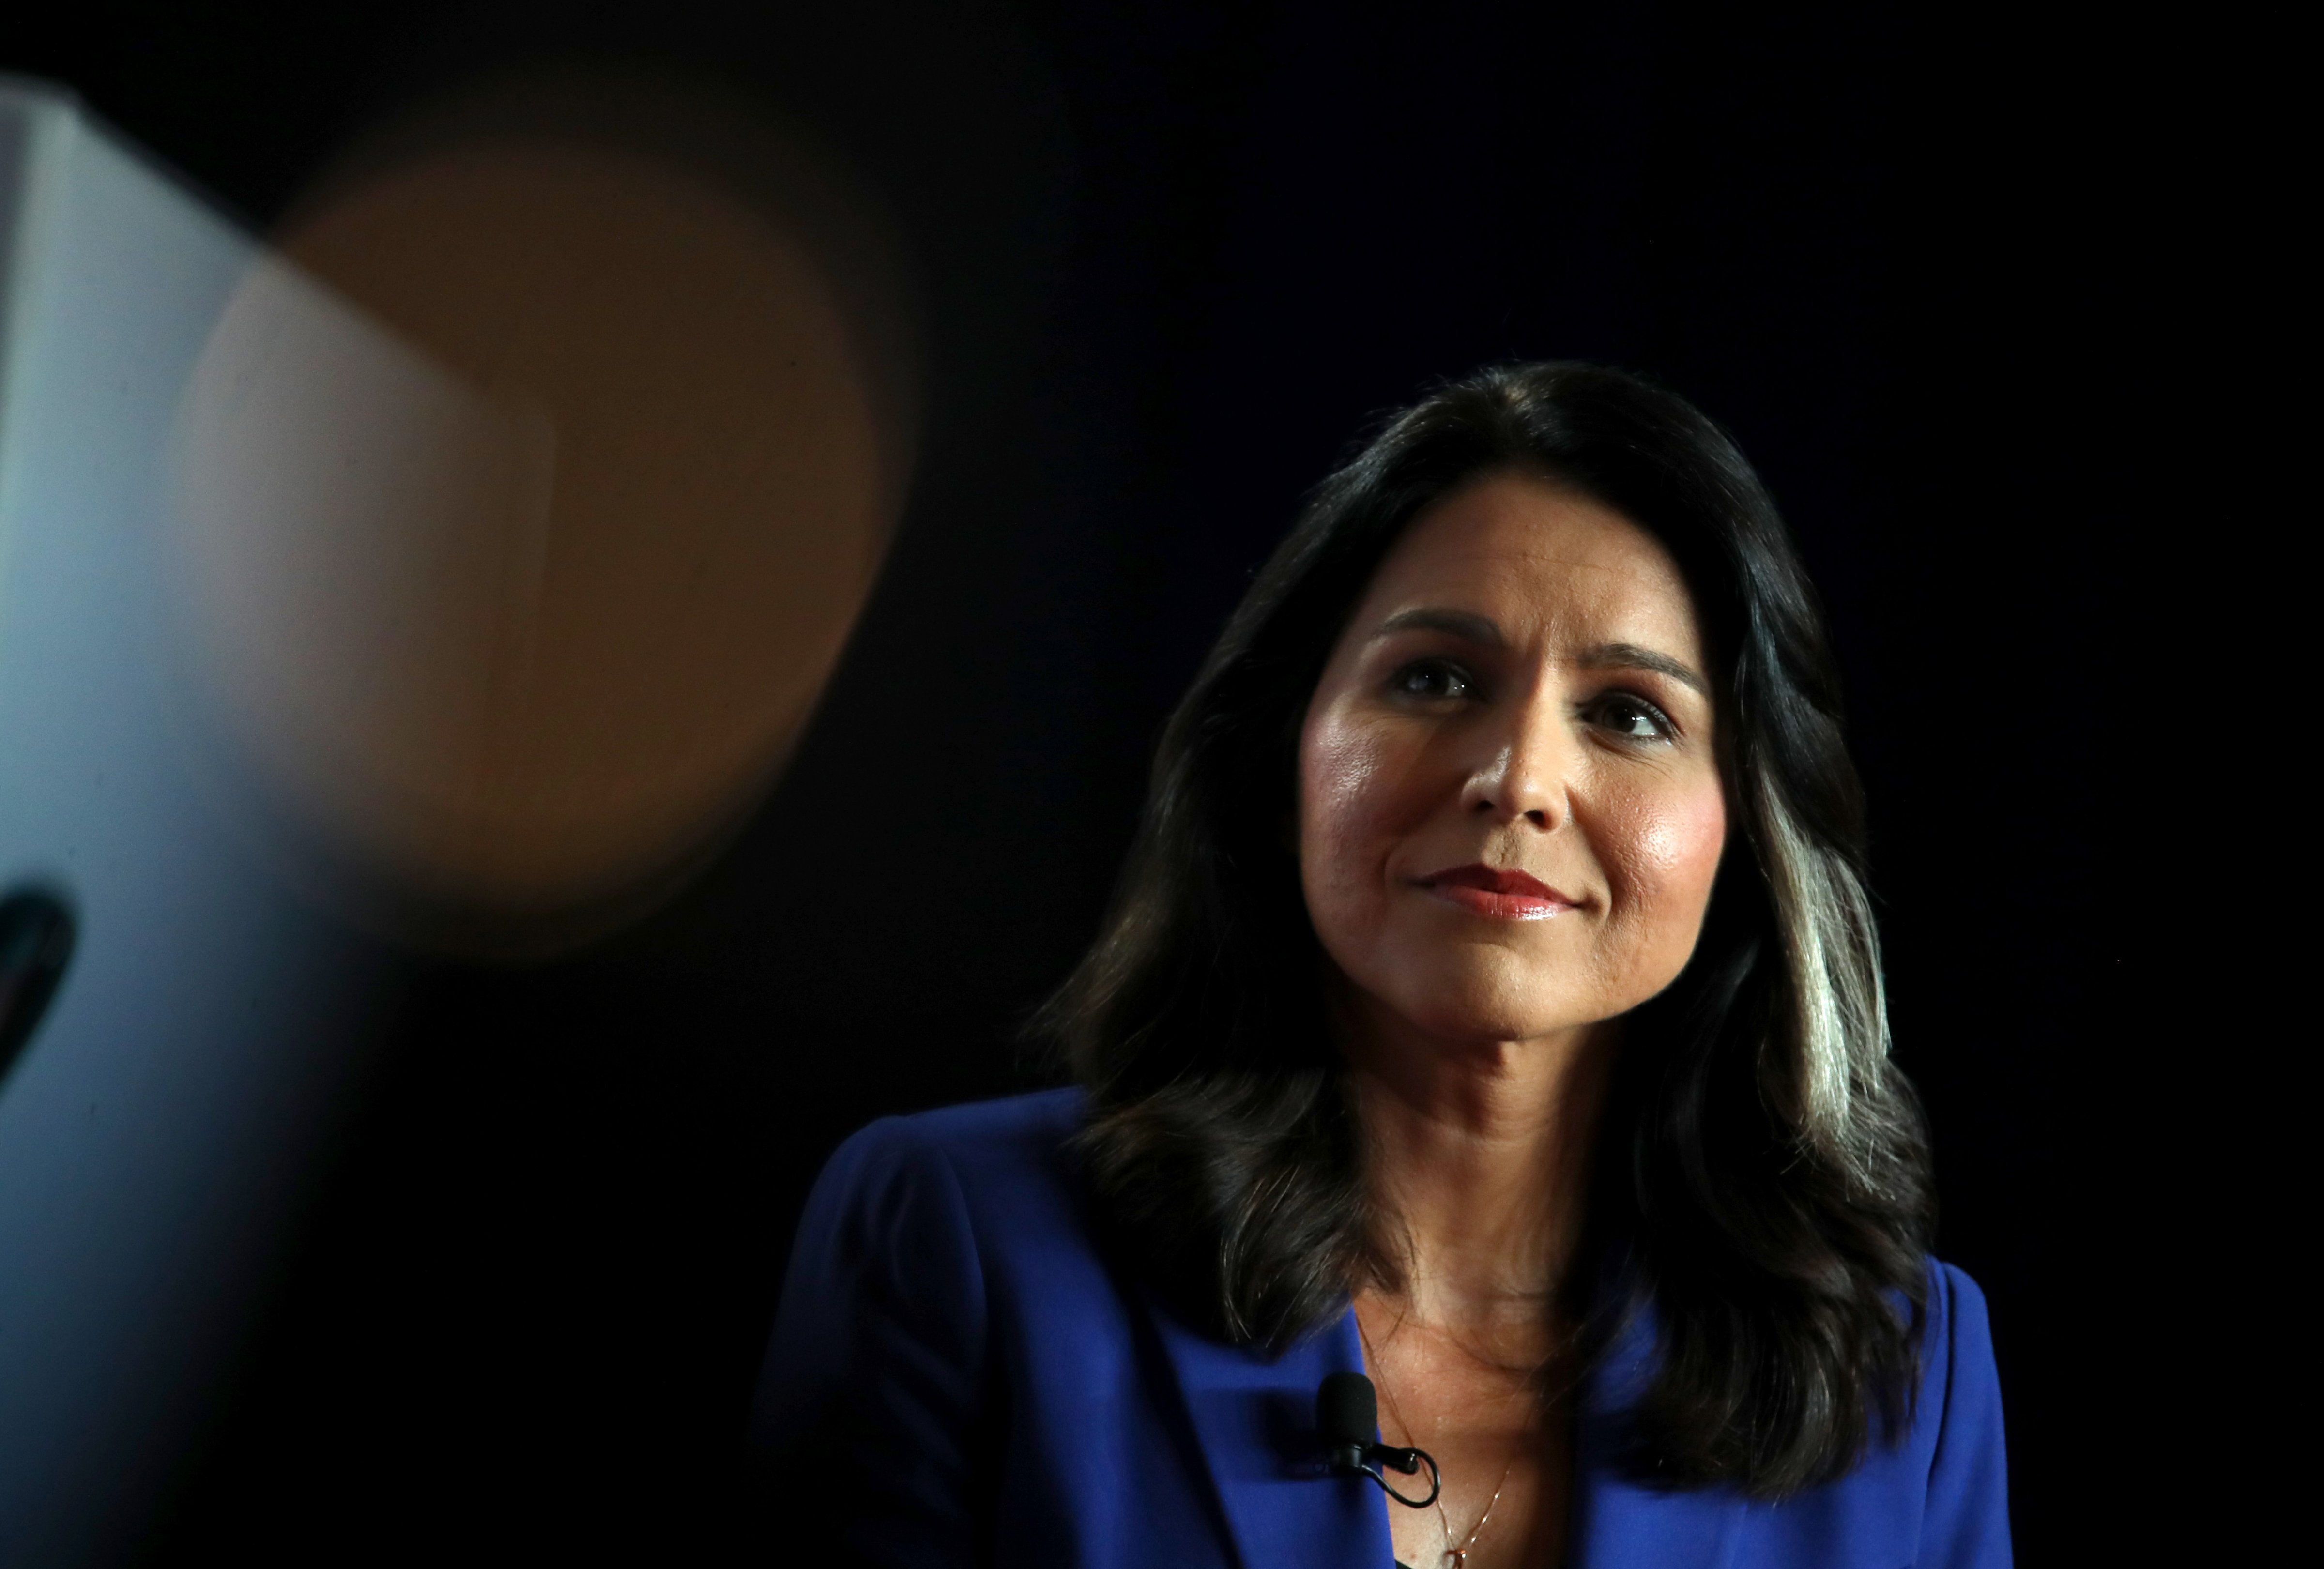 Democratic presidential candidate U.S. Rep. Tulsi Gabbard (D-HI) speaks during the AARP and The Des Moines Register Iowa Presidential Candidate Forum on July 17, 2019 in Cedar Rapids, Iowa. (Justin Sullivan—Getty Images)